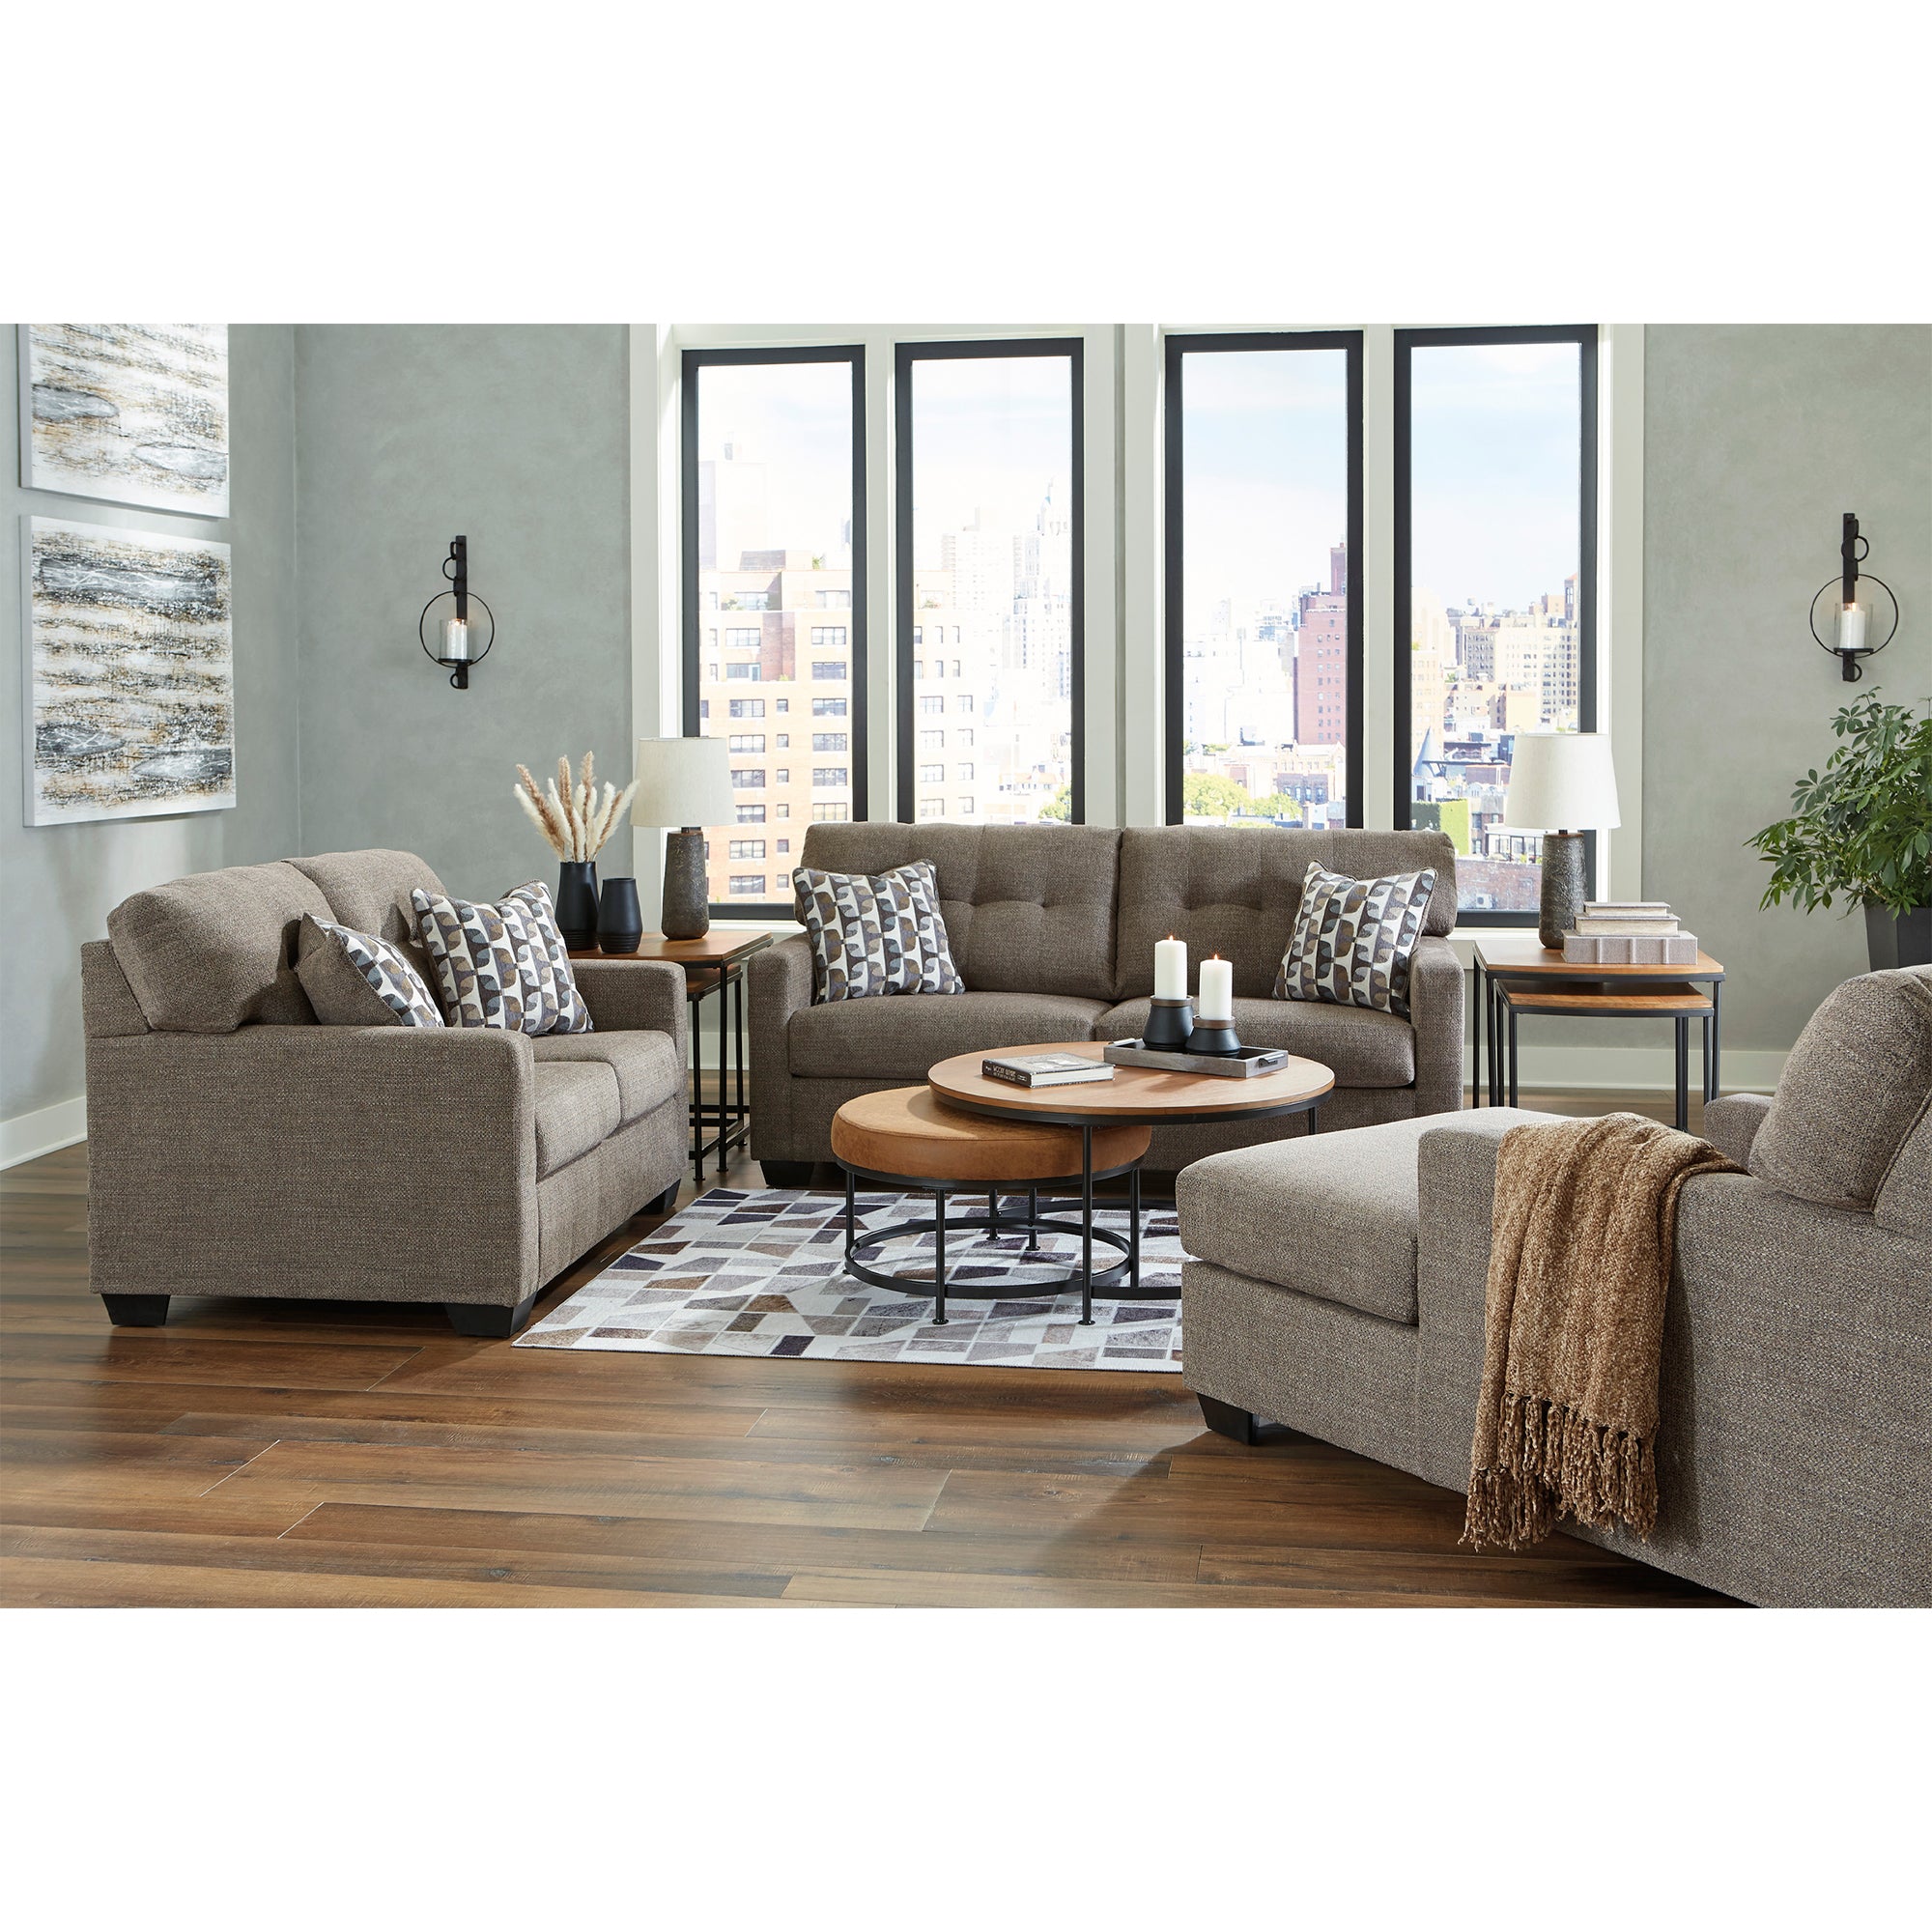 Plush chocolate Mahoney Sofa and Loveseat, offering a seamless blend of luxury and functionality for everyday use